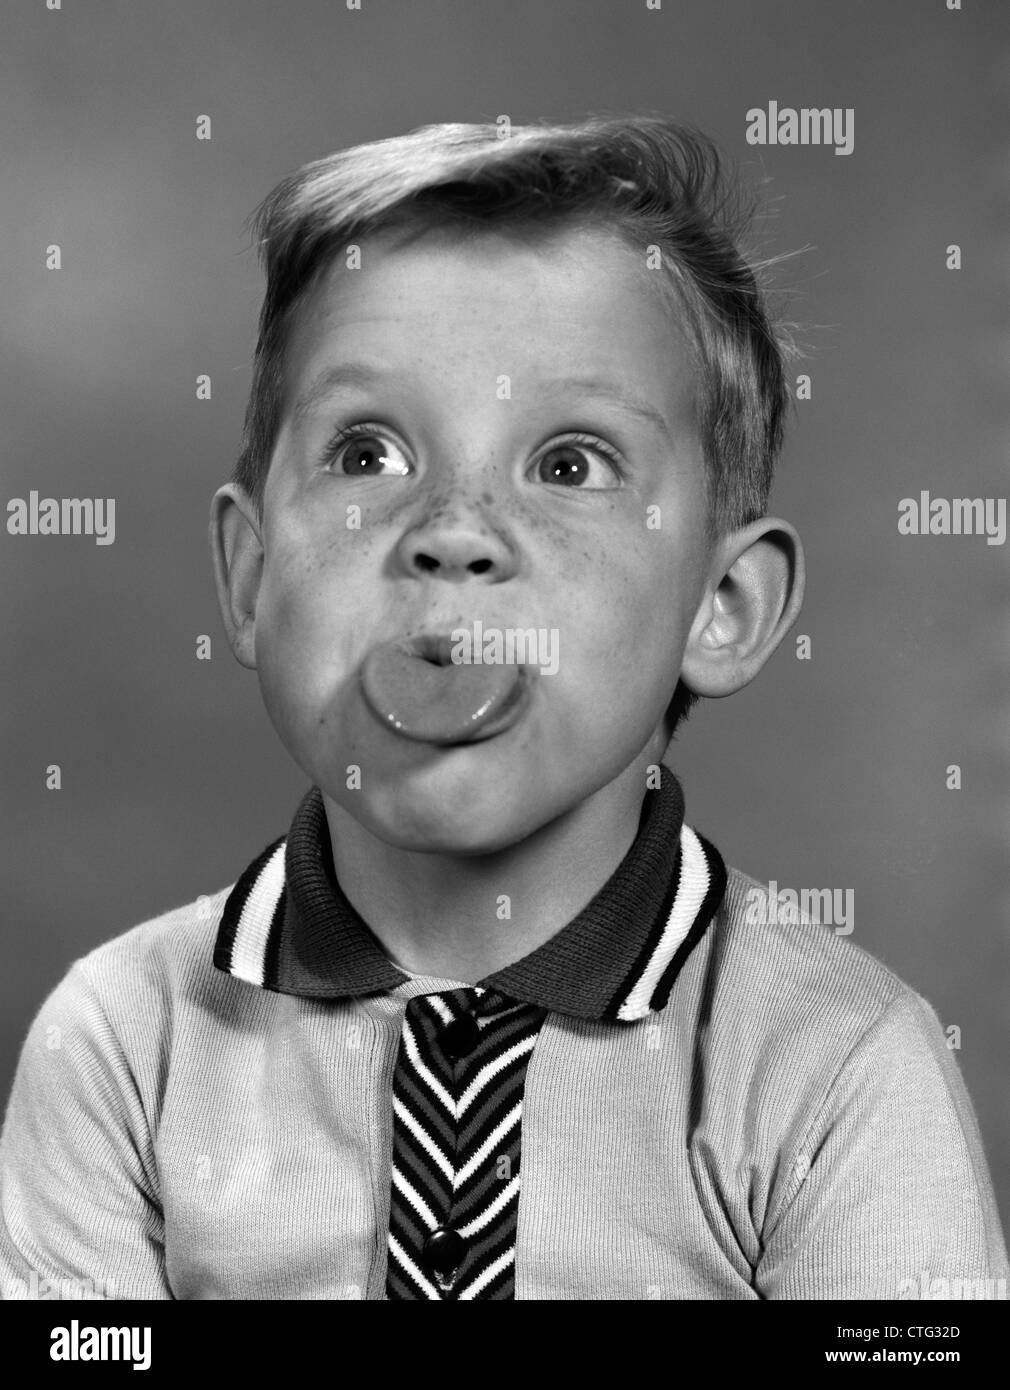 1960s PORTRAIT BOY WITH BLOND HAIR & FRECKLES STICKING TONGUE OUT Stock Photo